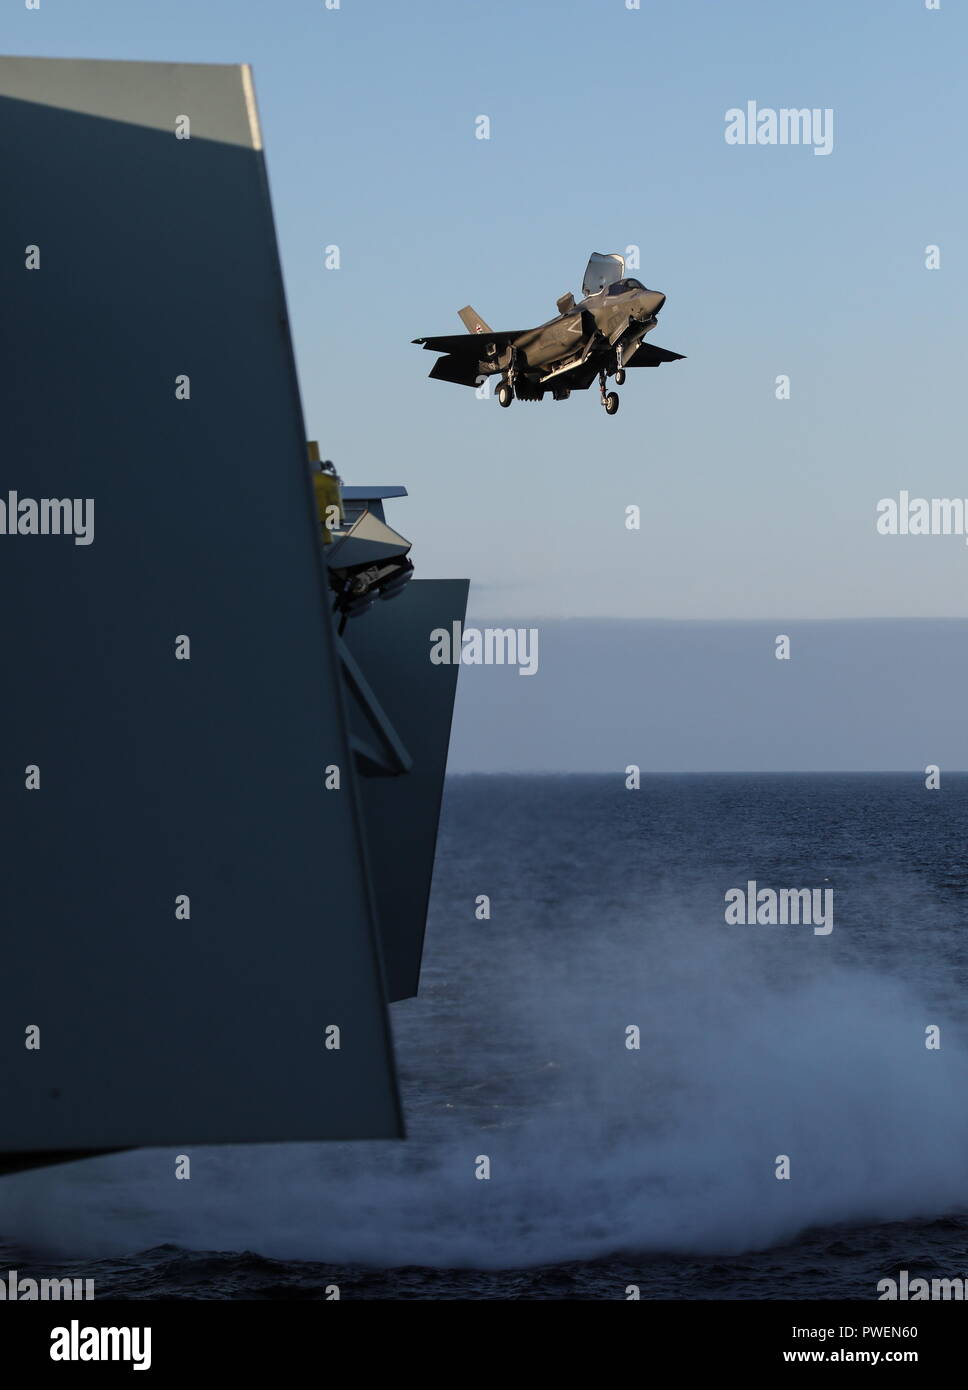 181006-N-N0101-308 NORTH ATLANTIC OCEAN (Oct. 6, 2018) An F-35B Lightning II assigned  to the F-35 Integrated Test Force at Naval Air Station Patuxent River, Md., lands aboard the Royal Navy aircraft carrier HMS Queen Elizabeth (R08). (U.S. Navy photo courtesy of the Royal Navy/Released) Stock Photo